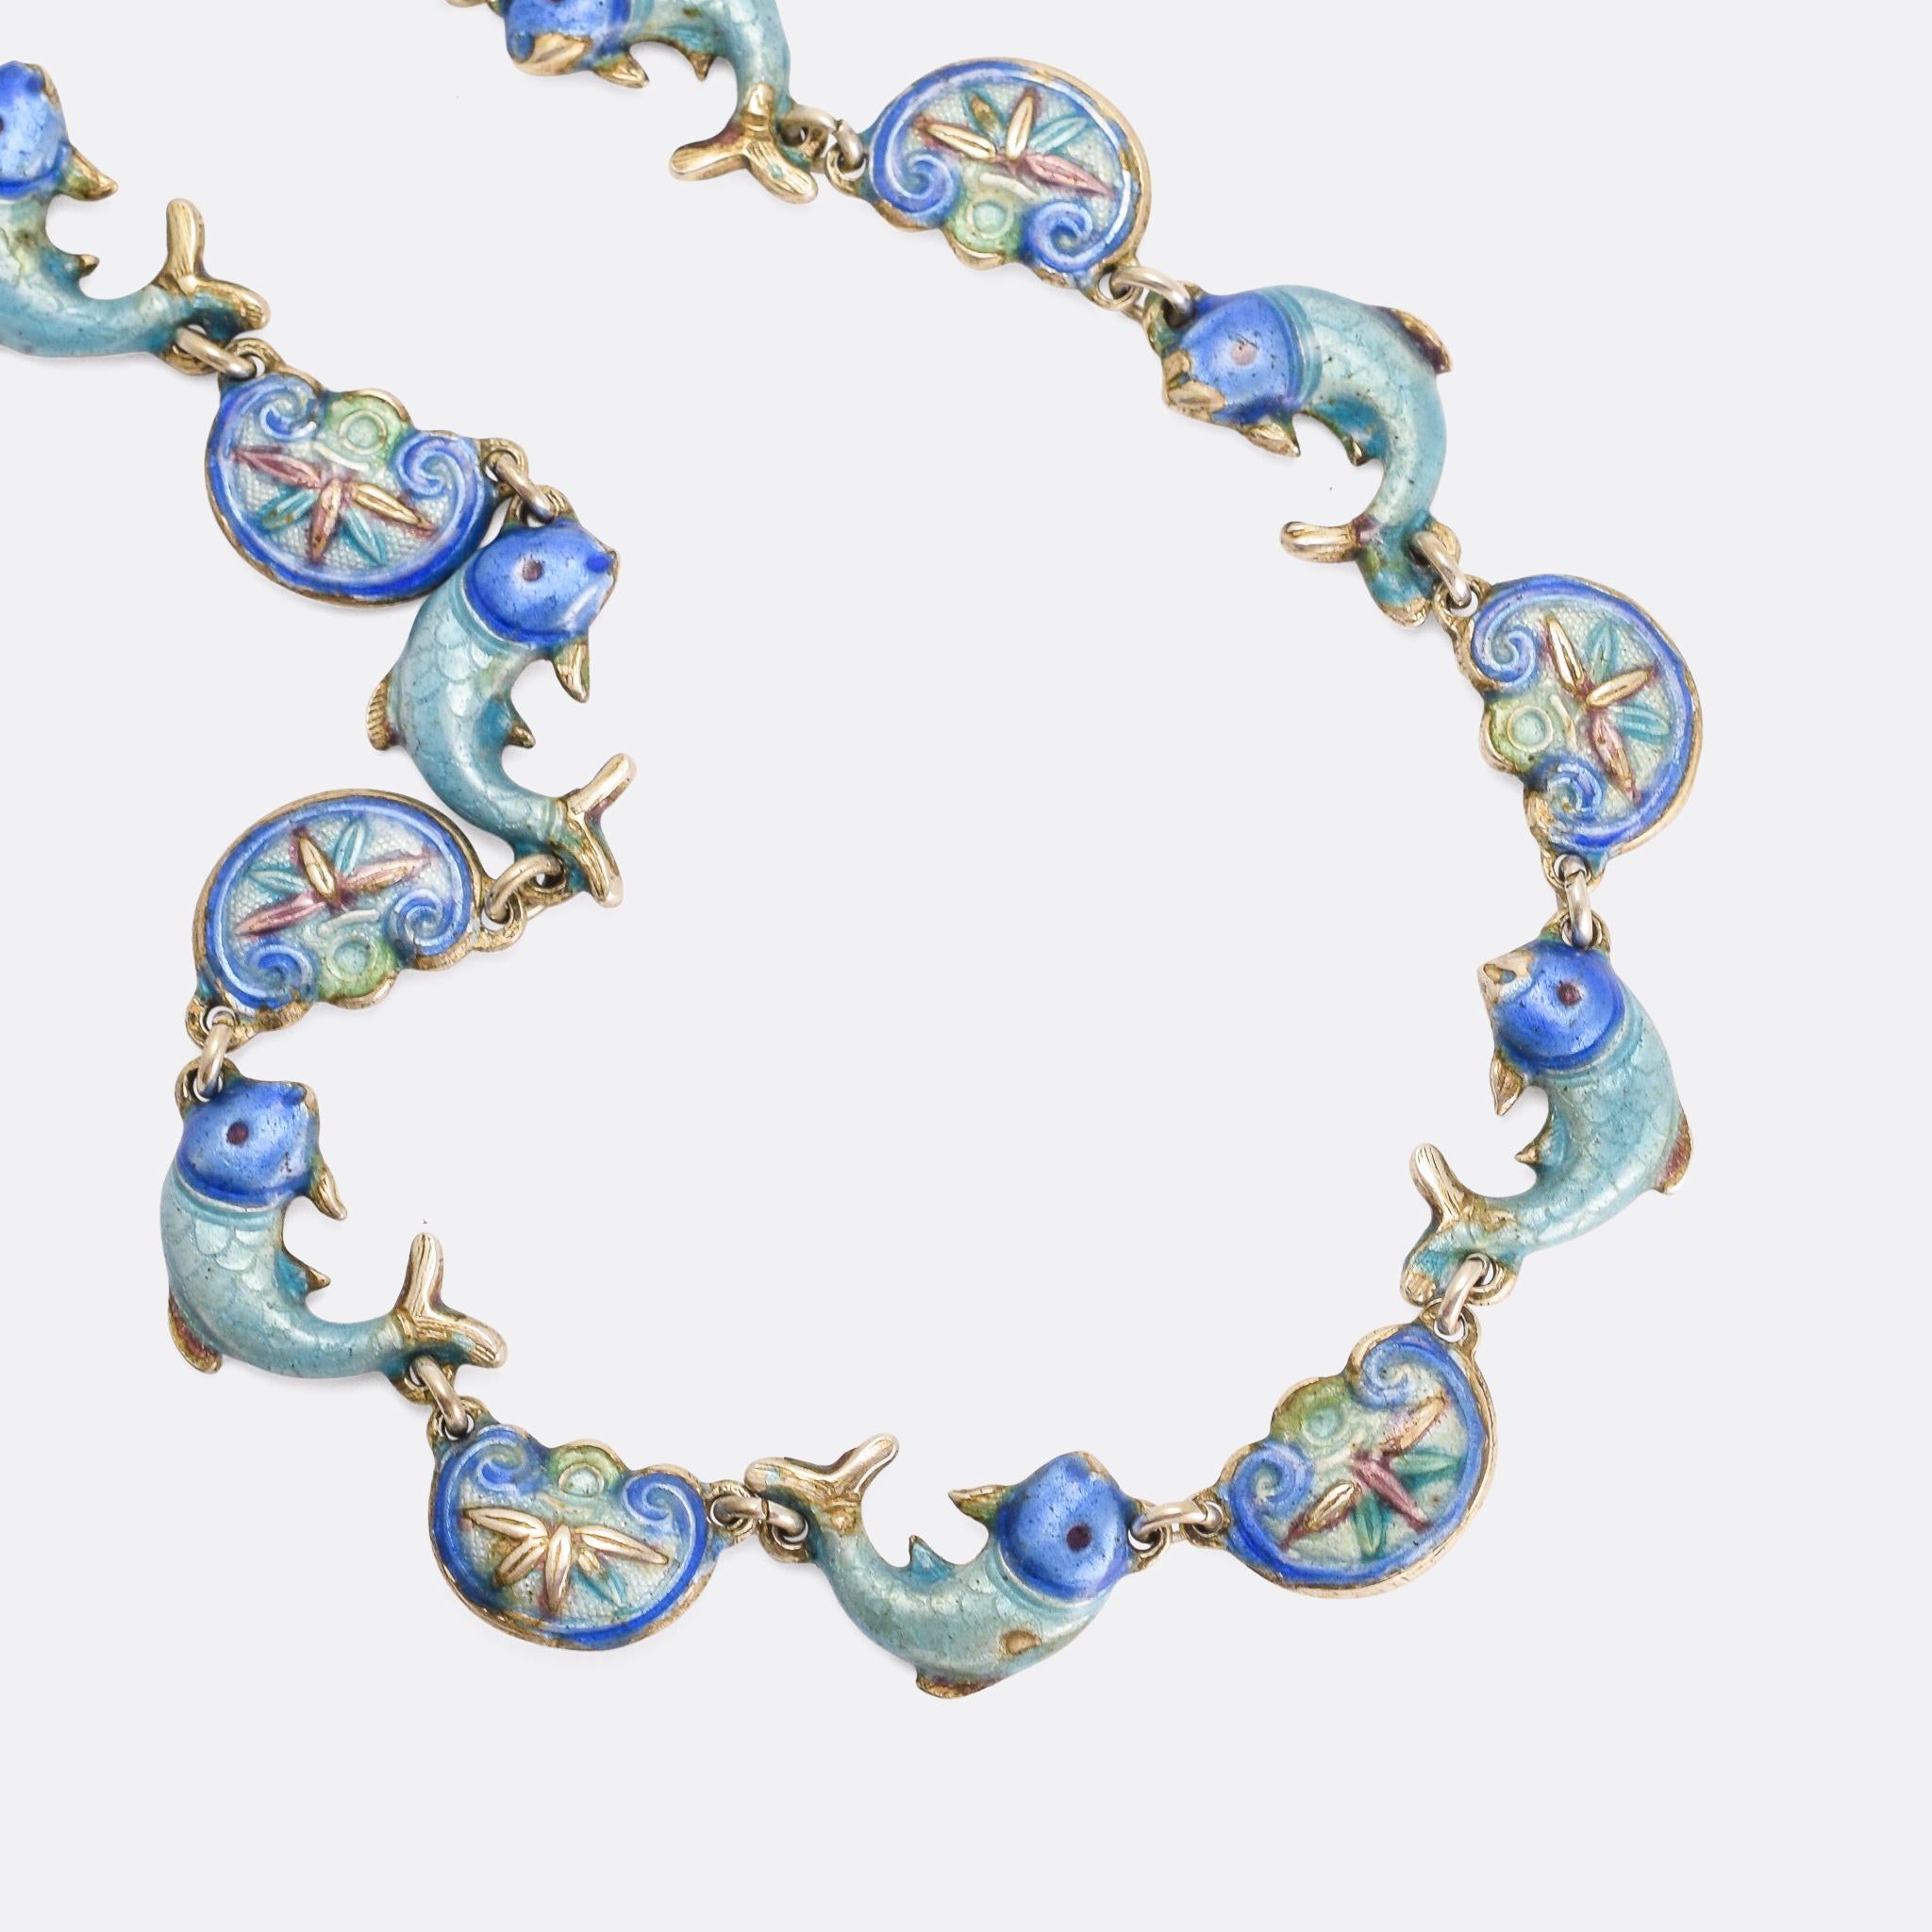 A cute vintage necklace featuring colourfully enamelled fish and lotus motifs. It’s Chinese, made in the 1970s, and modelled in silver throughout.

MEASUREMENTS
Wearable length: 16 inches

WEIGHT
23.5g

MARKS
No marks present, tests as Silver